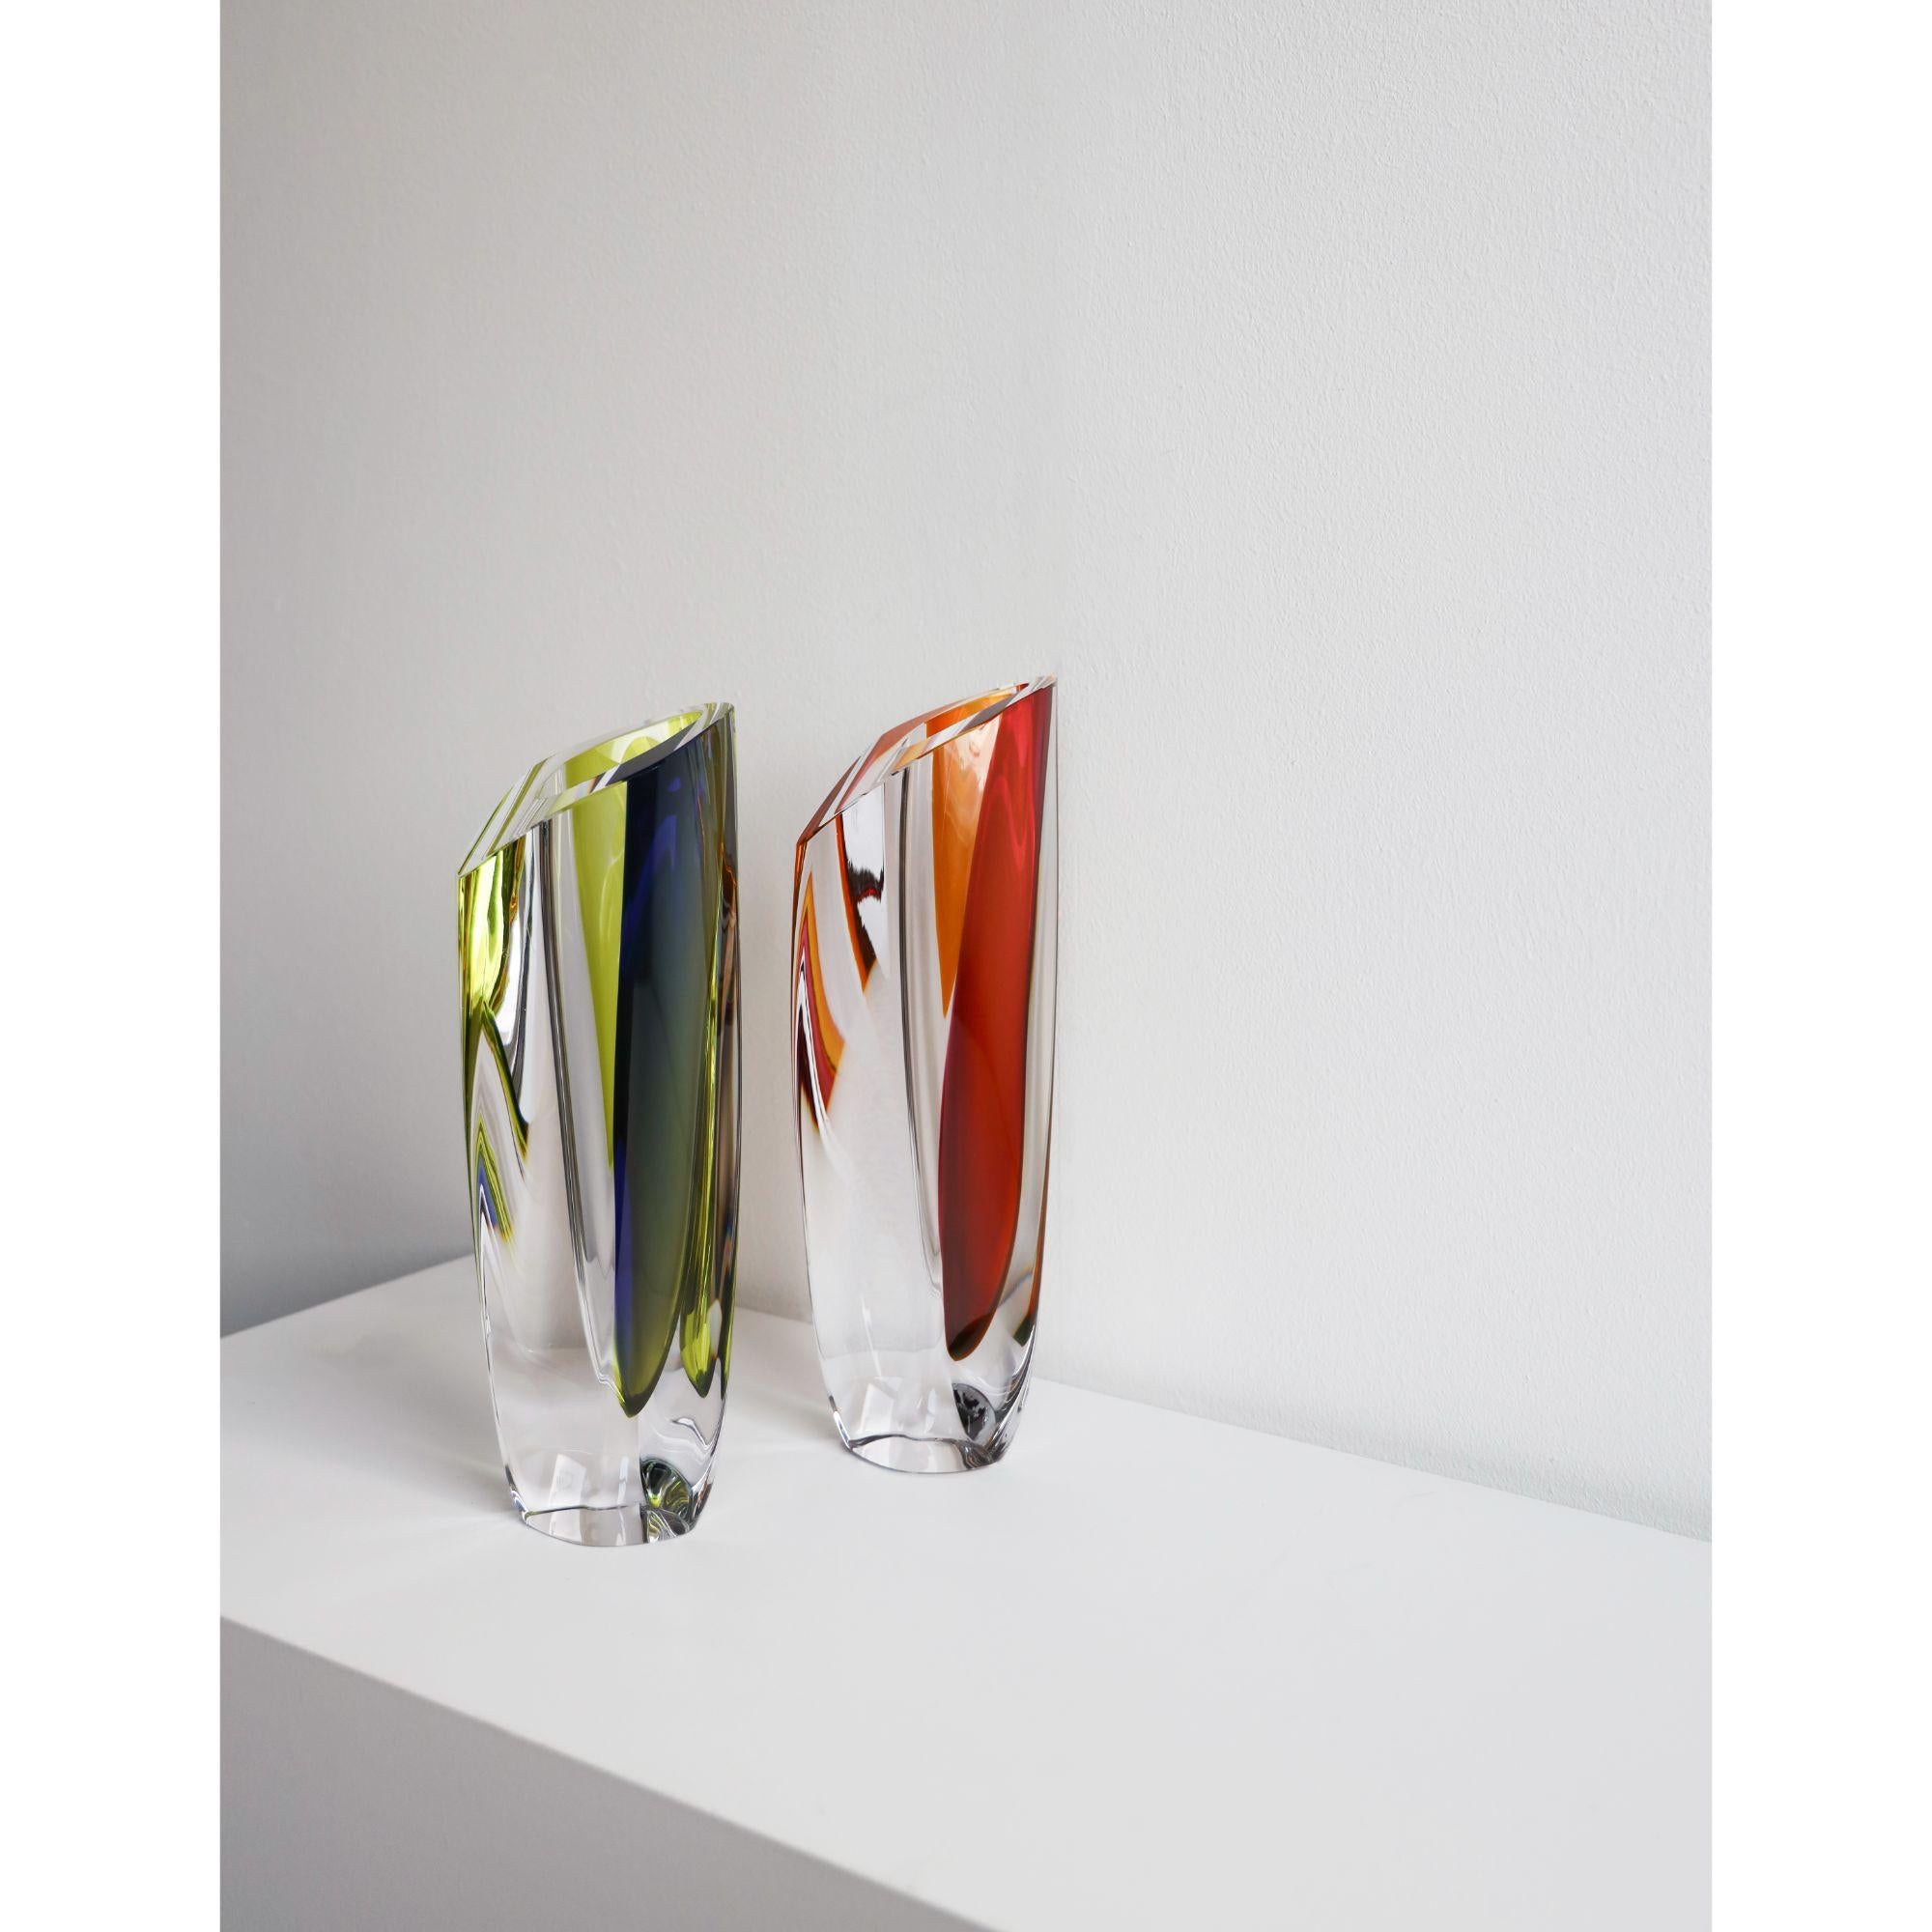 Saraband is one of many artistic creations by the legendary glass artist Göran Wärff, who worked with Kosta Boda for decades. The vibrant colors and the sharp edges give the object a dramatic expression. Saraband is handmade at Kosta Glassworks in